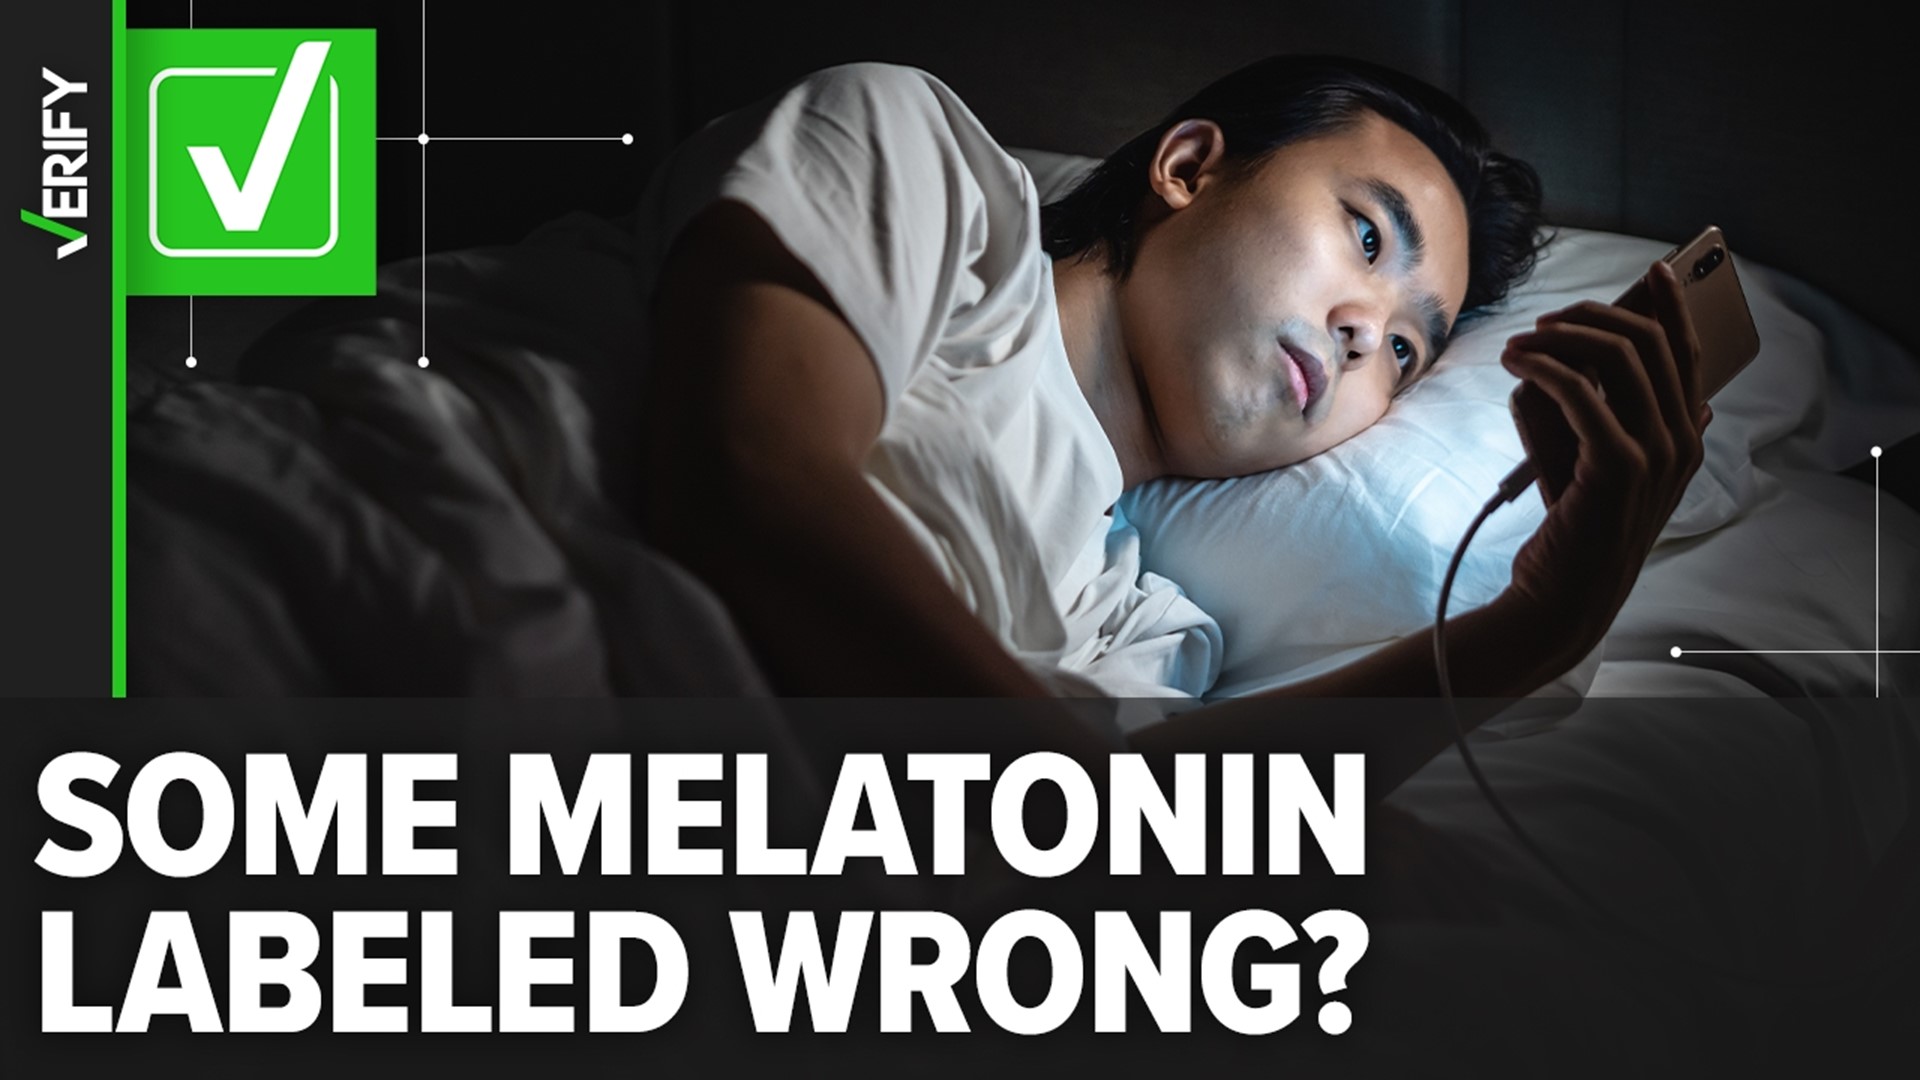 A JAMA study found that the majority of melatonin gummy brands analyzed contained lower or higher quantities of sleep aid melatonin than advertised on the bottle.